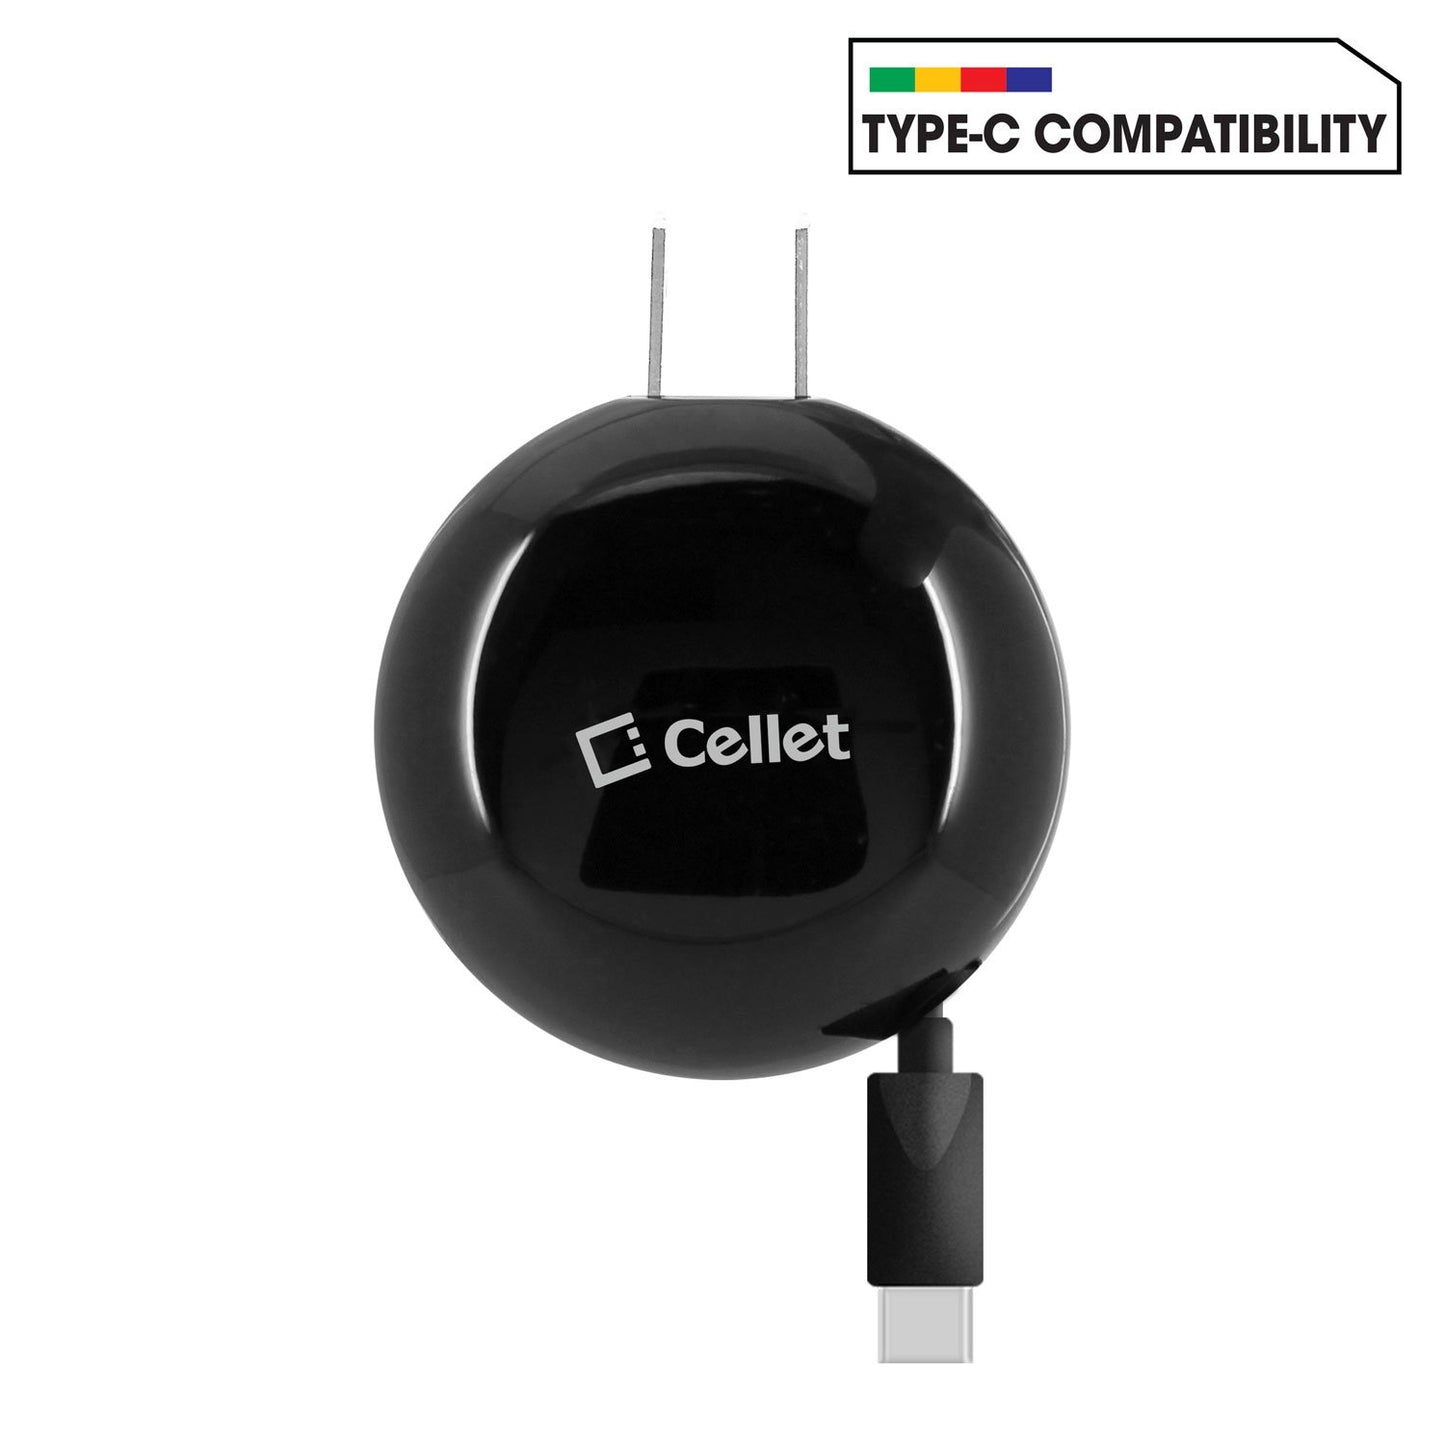 Celle USB-C Retractable Home Charger for Samsung Galaxy Smartphone, Google Pixel and Motorola Moto and all Device with USB-C (TCUSBCR30)